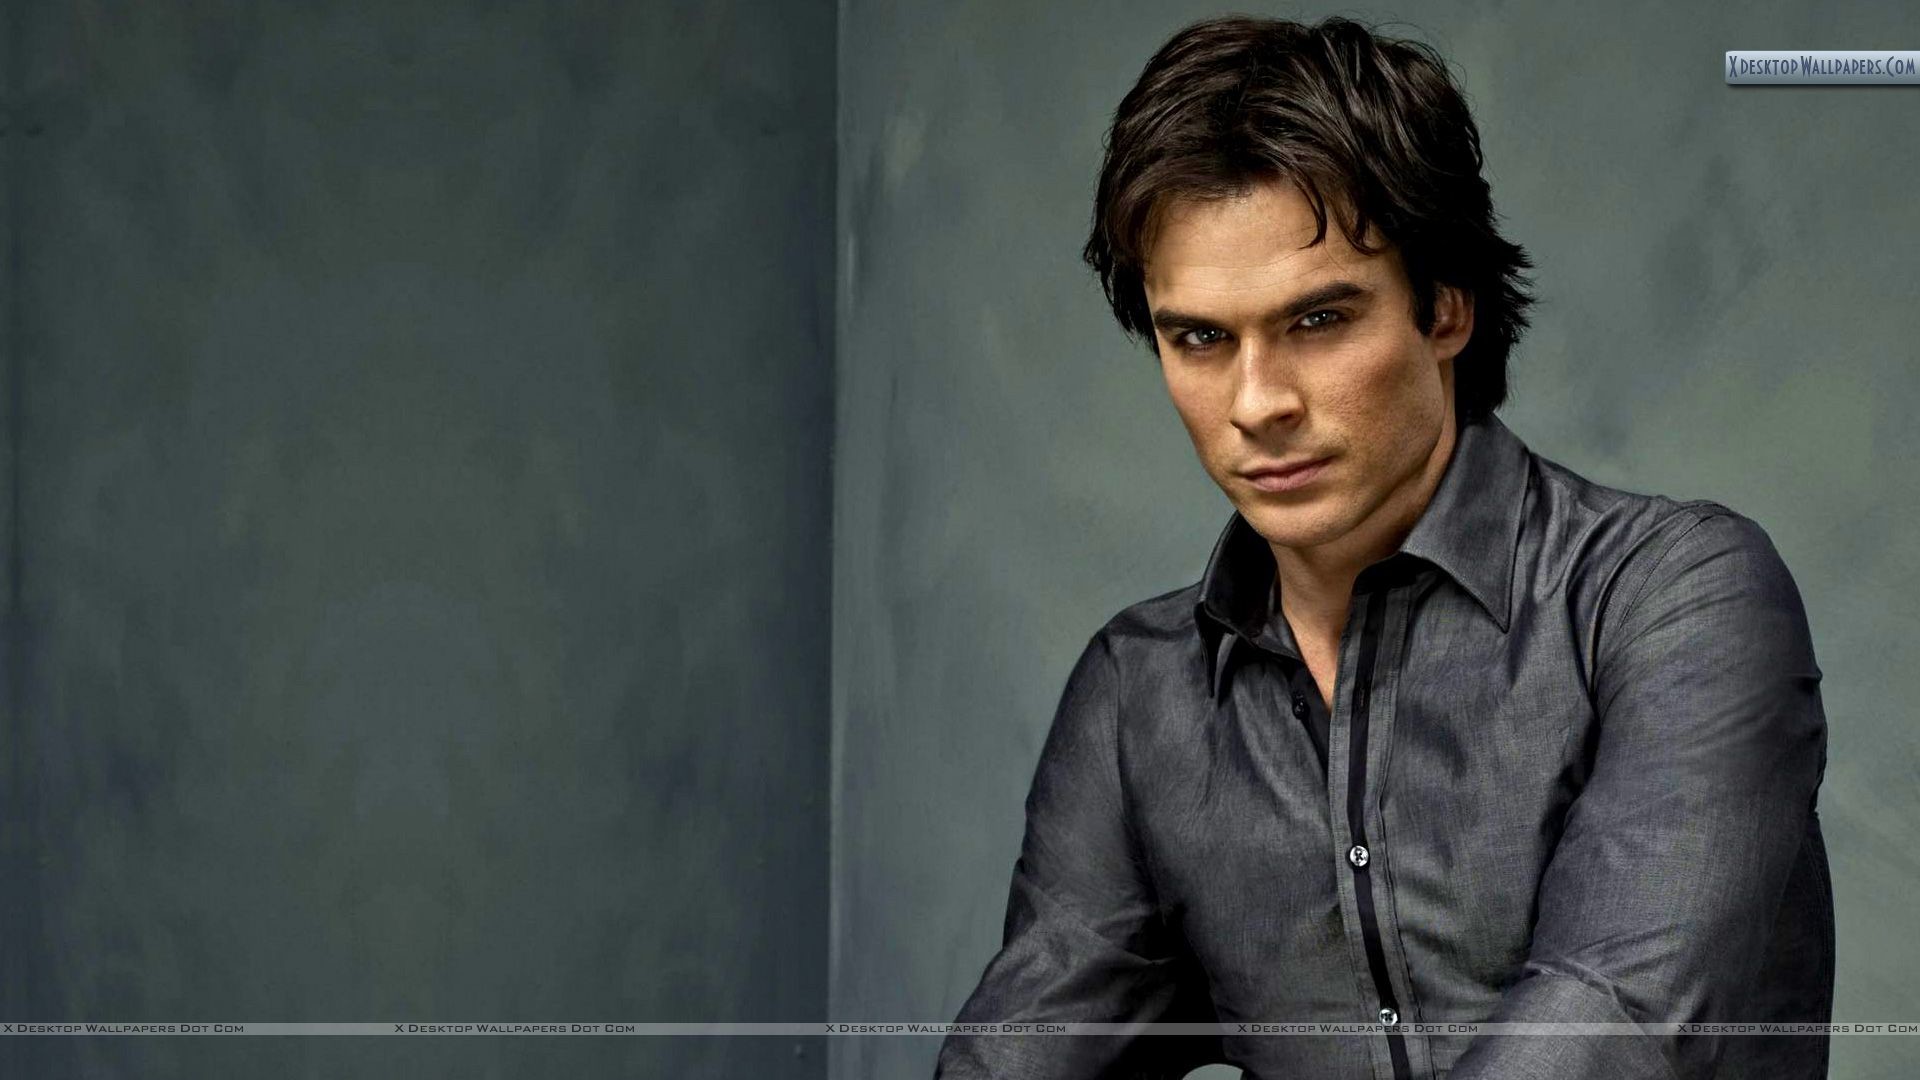 1920x1080 You are viewing wallpaper titled "Ian Somerhalder ...